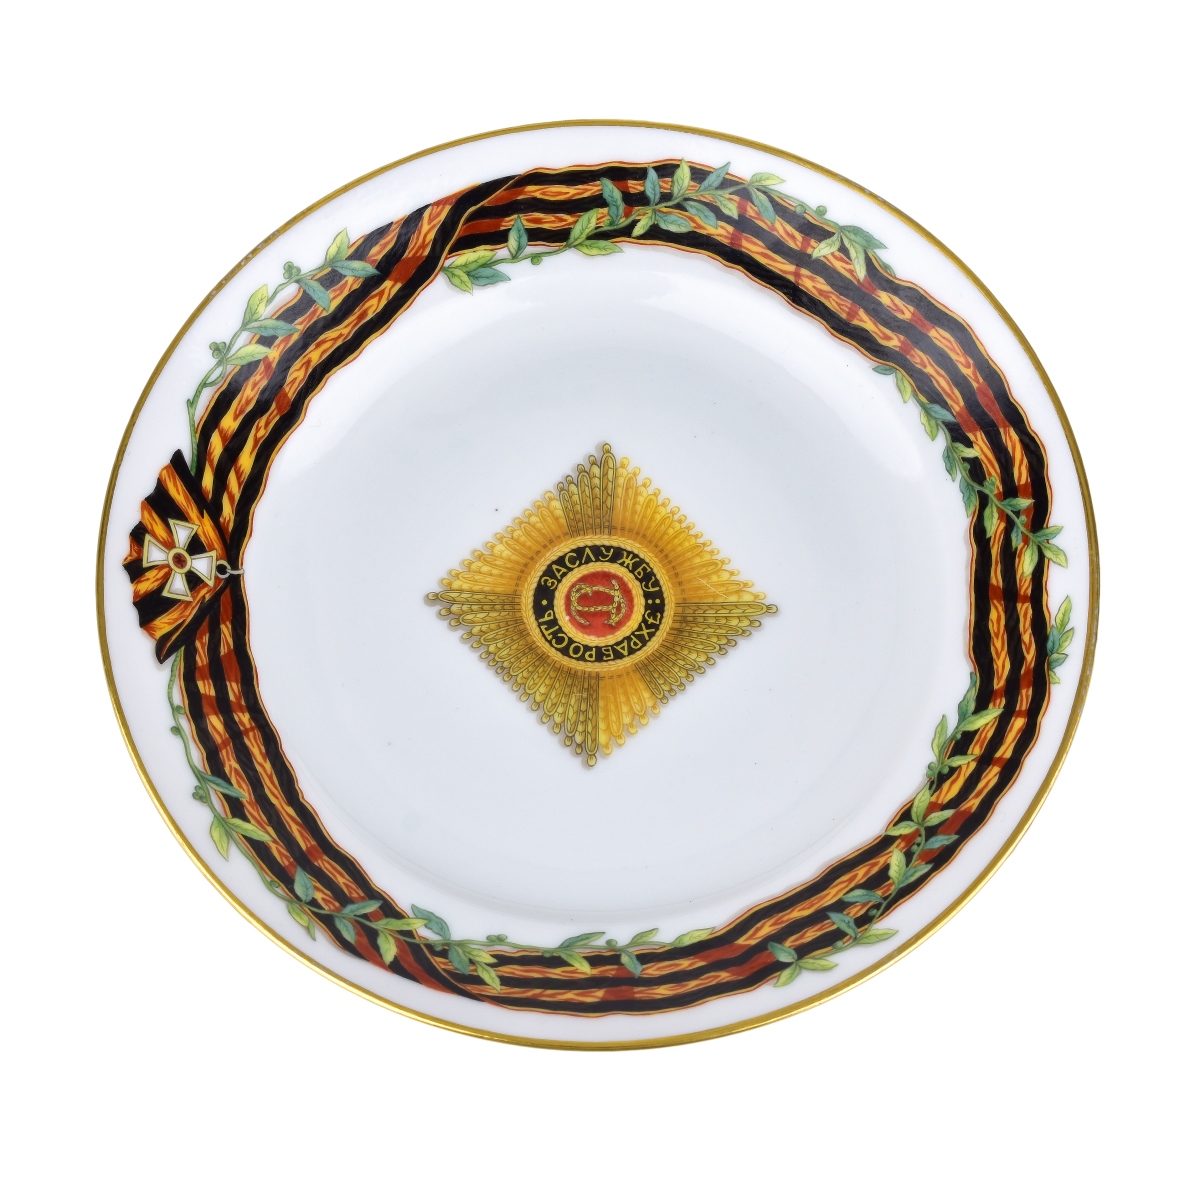 Russian Order St. George Style Porcelain Plate